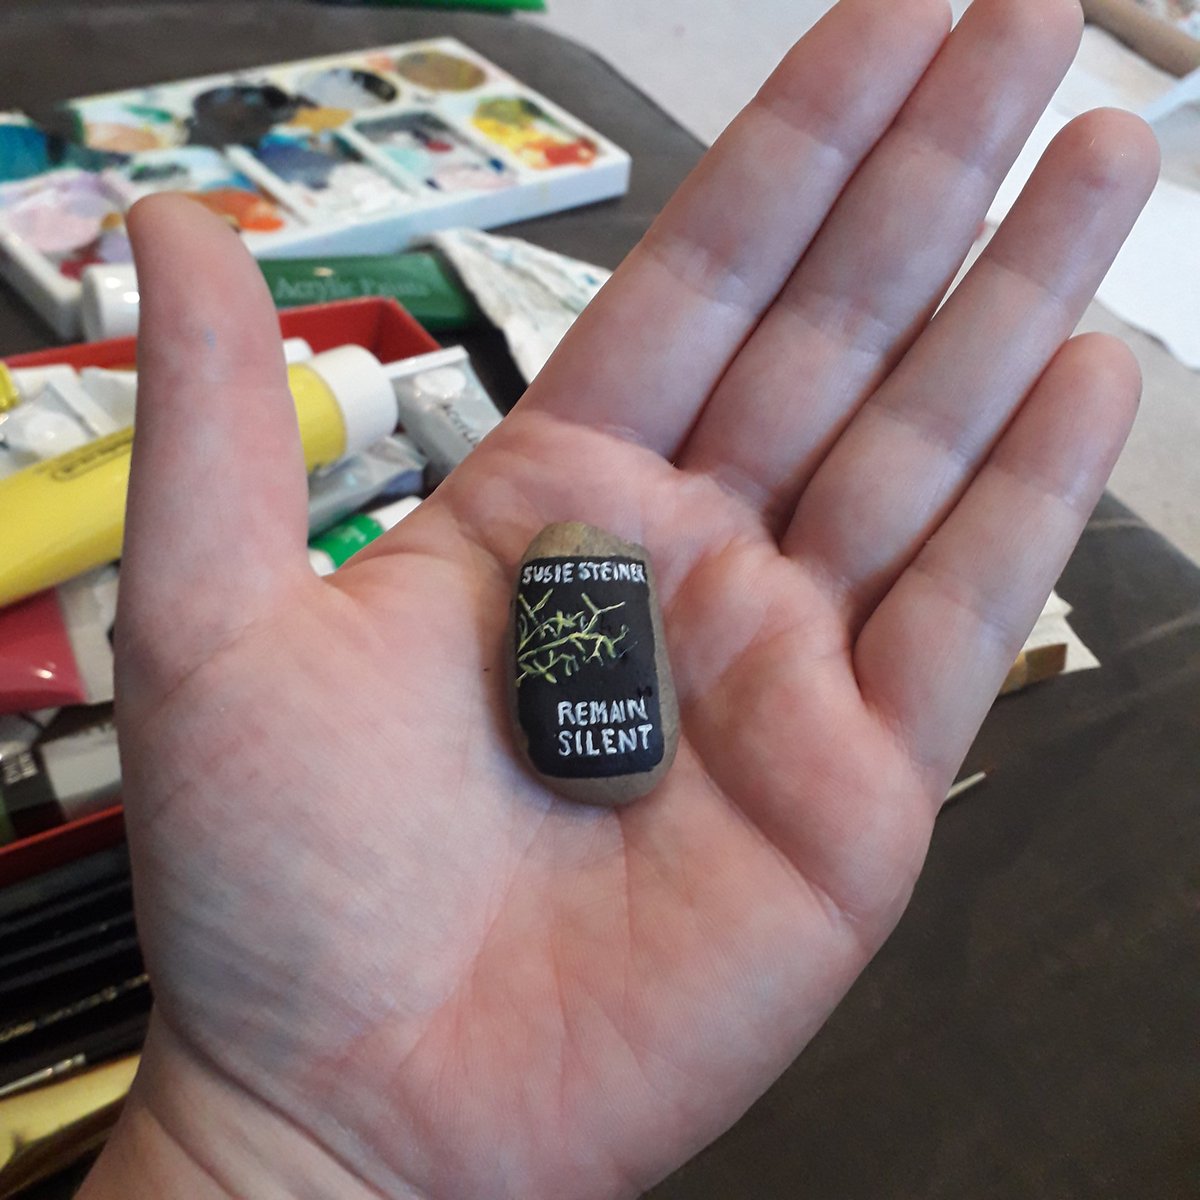 Remain Silent by  @SusieSteiner1 painted on a pebble to be hidden in my library. Good luck with the launch! I've definitely gone too small with the rock again.